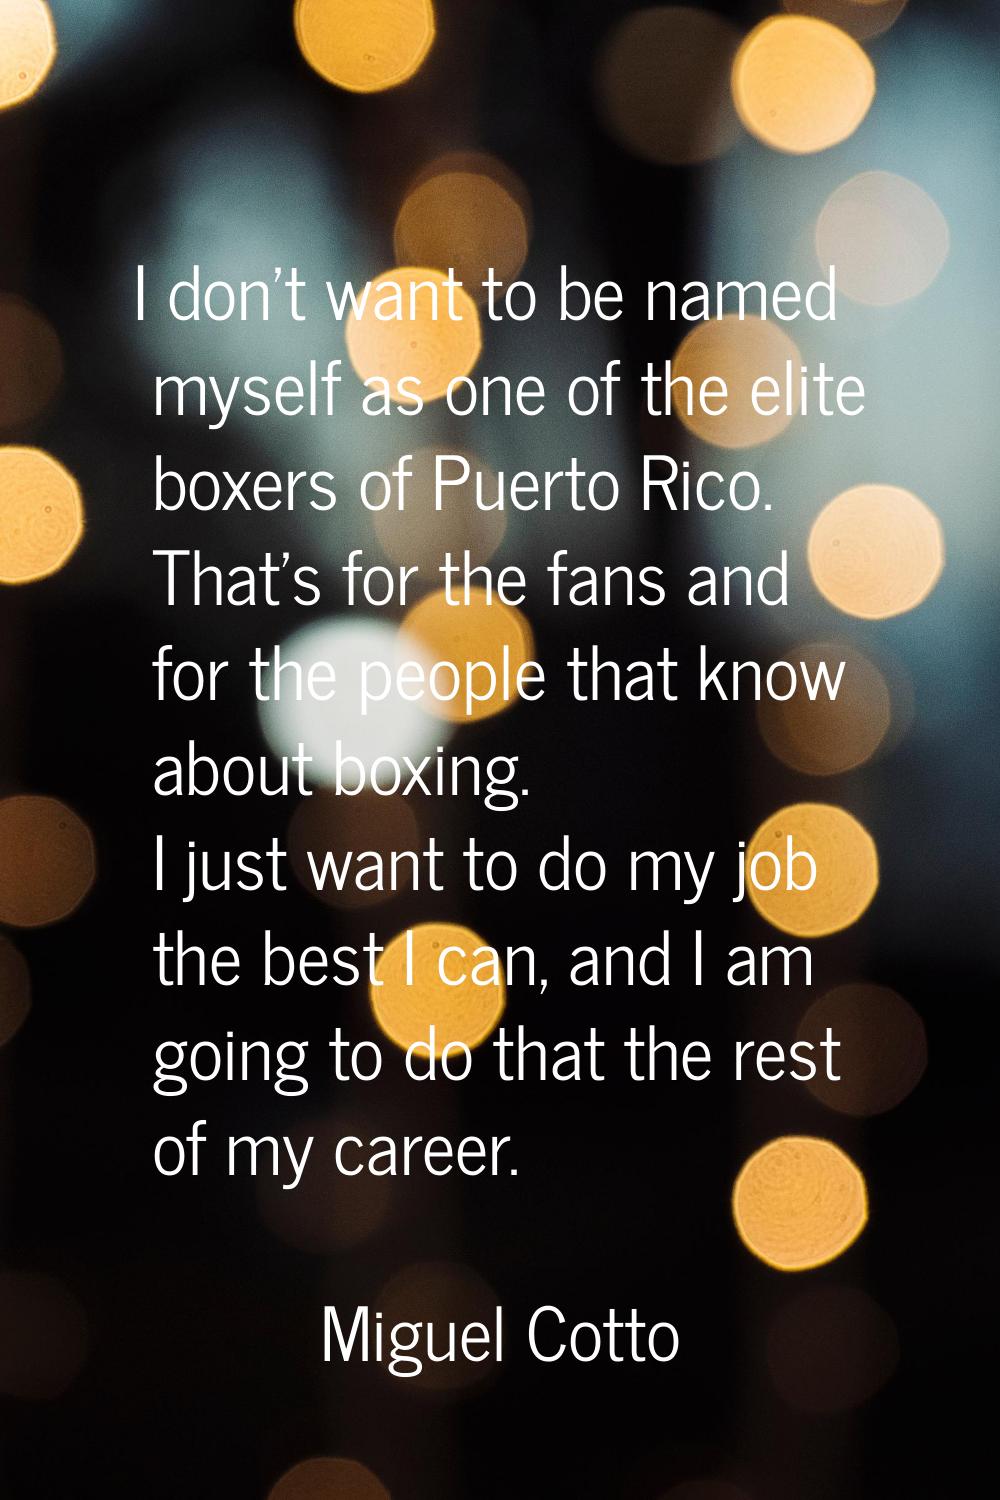 I don't want to be named myself as one of the elite boxers of Puerto Rico. That's for the fans and 